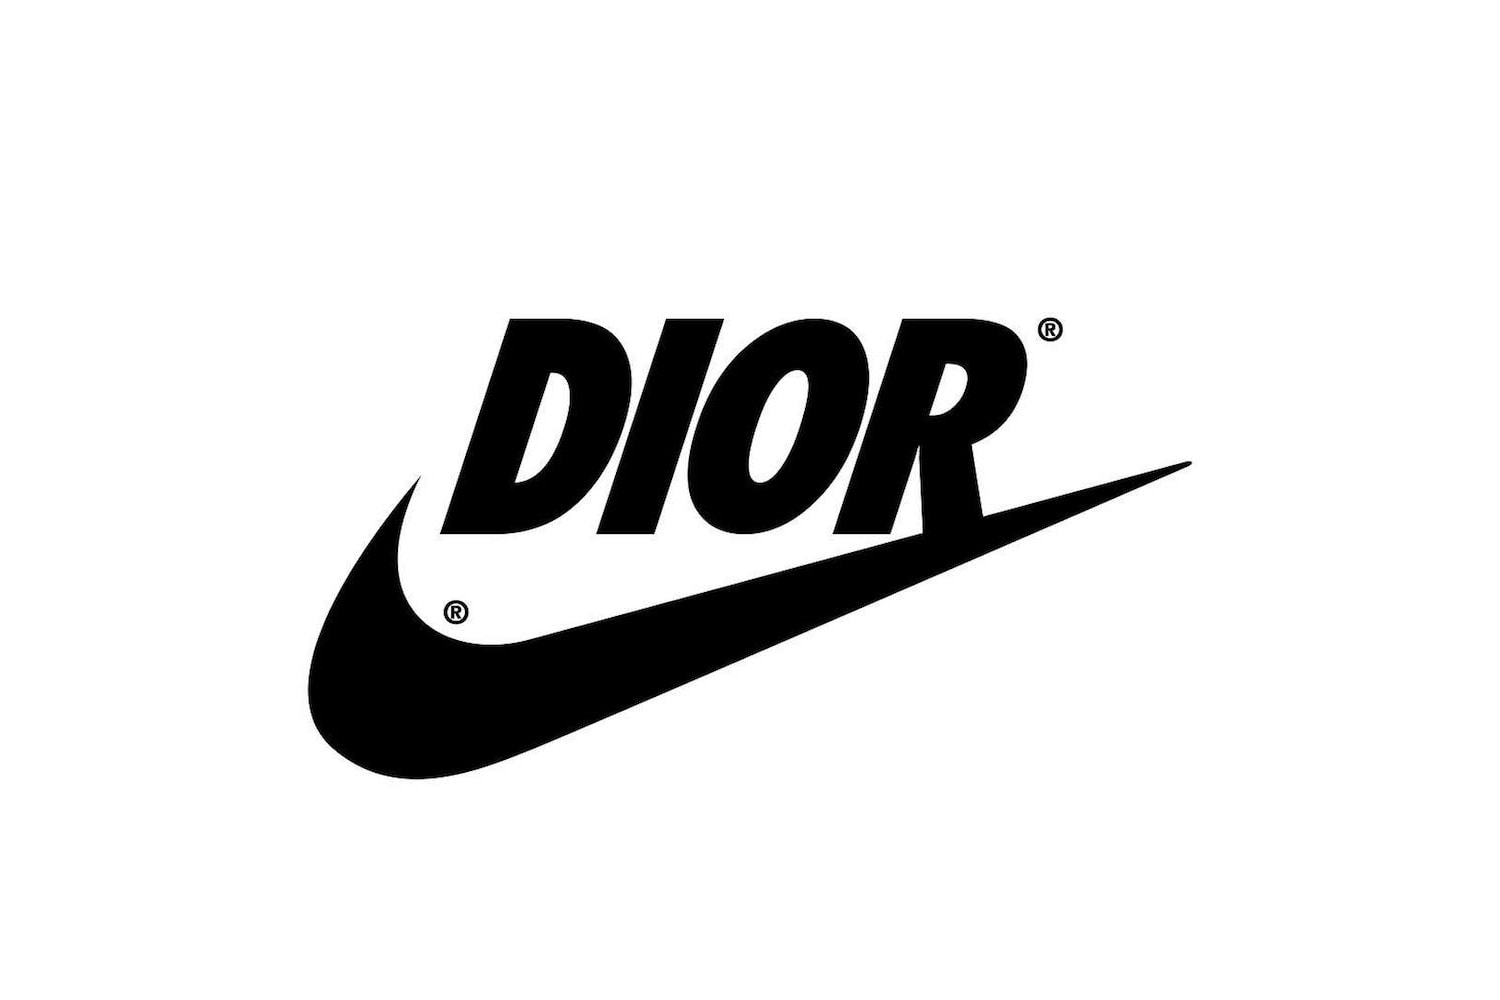 Dior Homme x Nike Collaboration